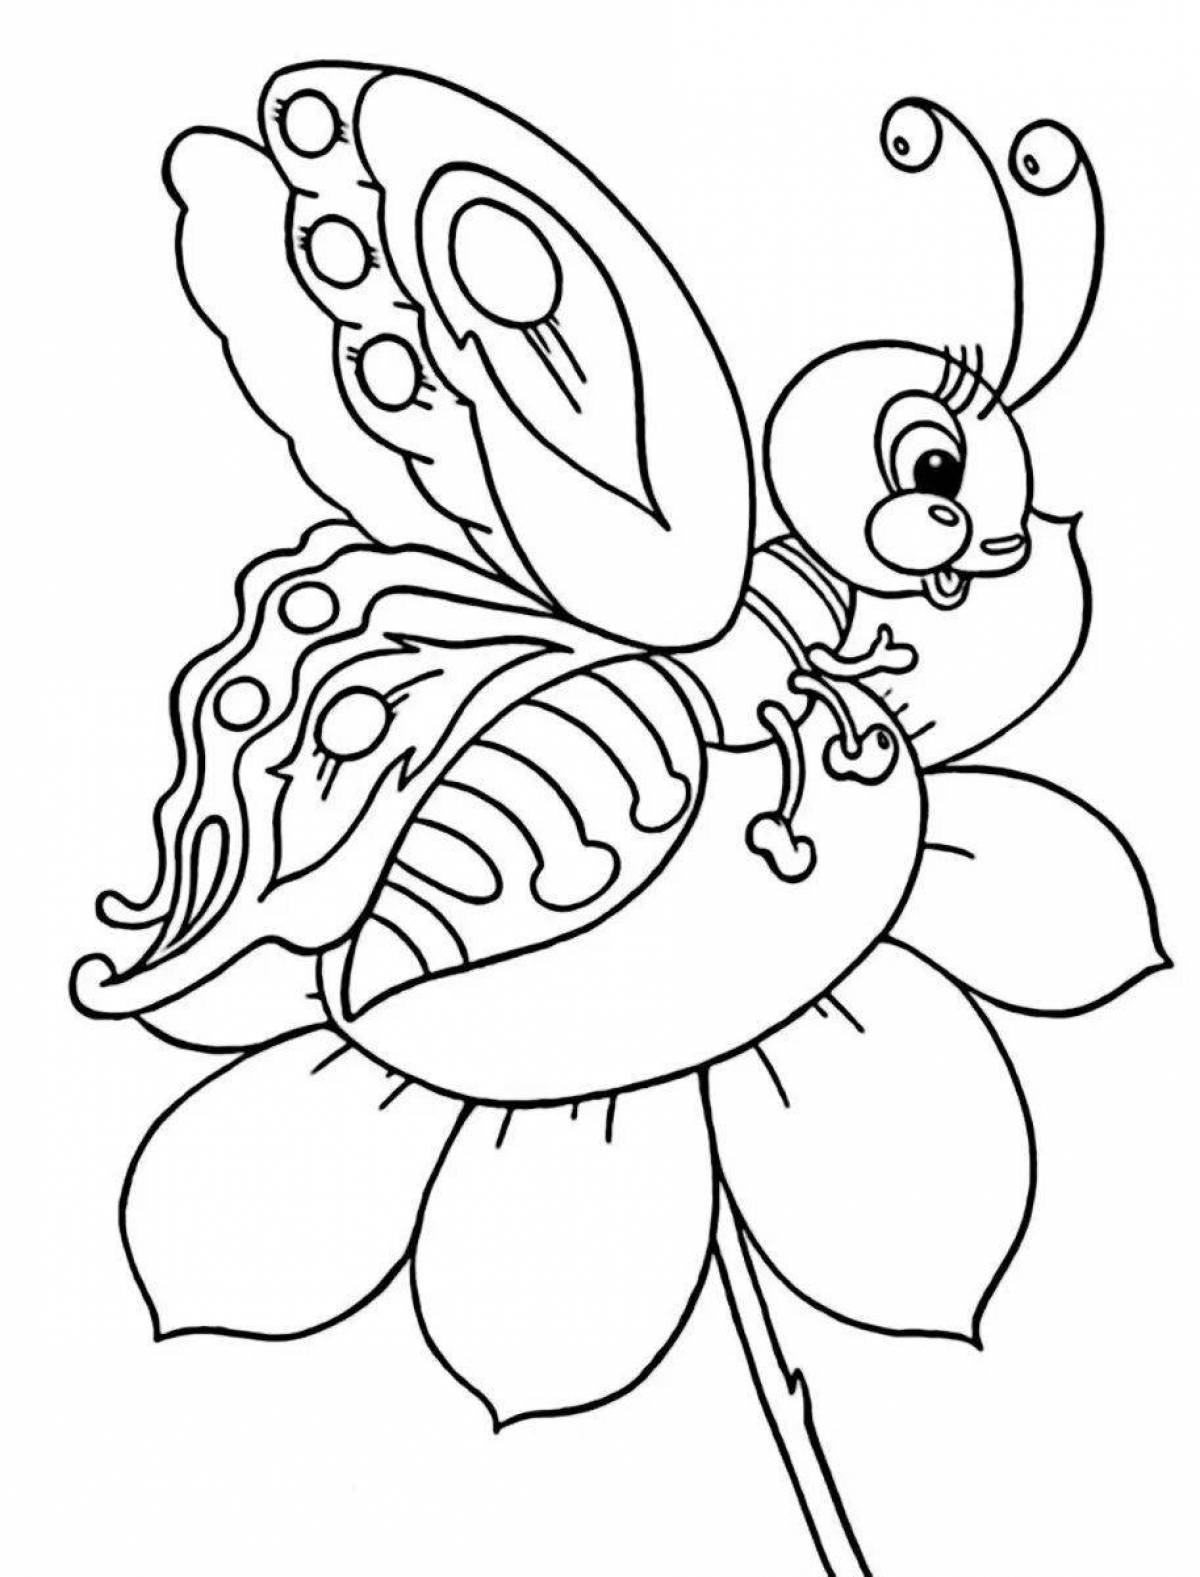 Insect coloring pages for kids 6-7 years old